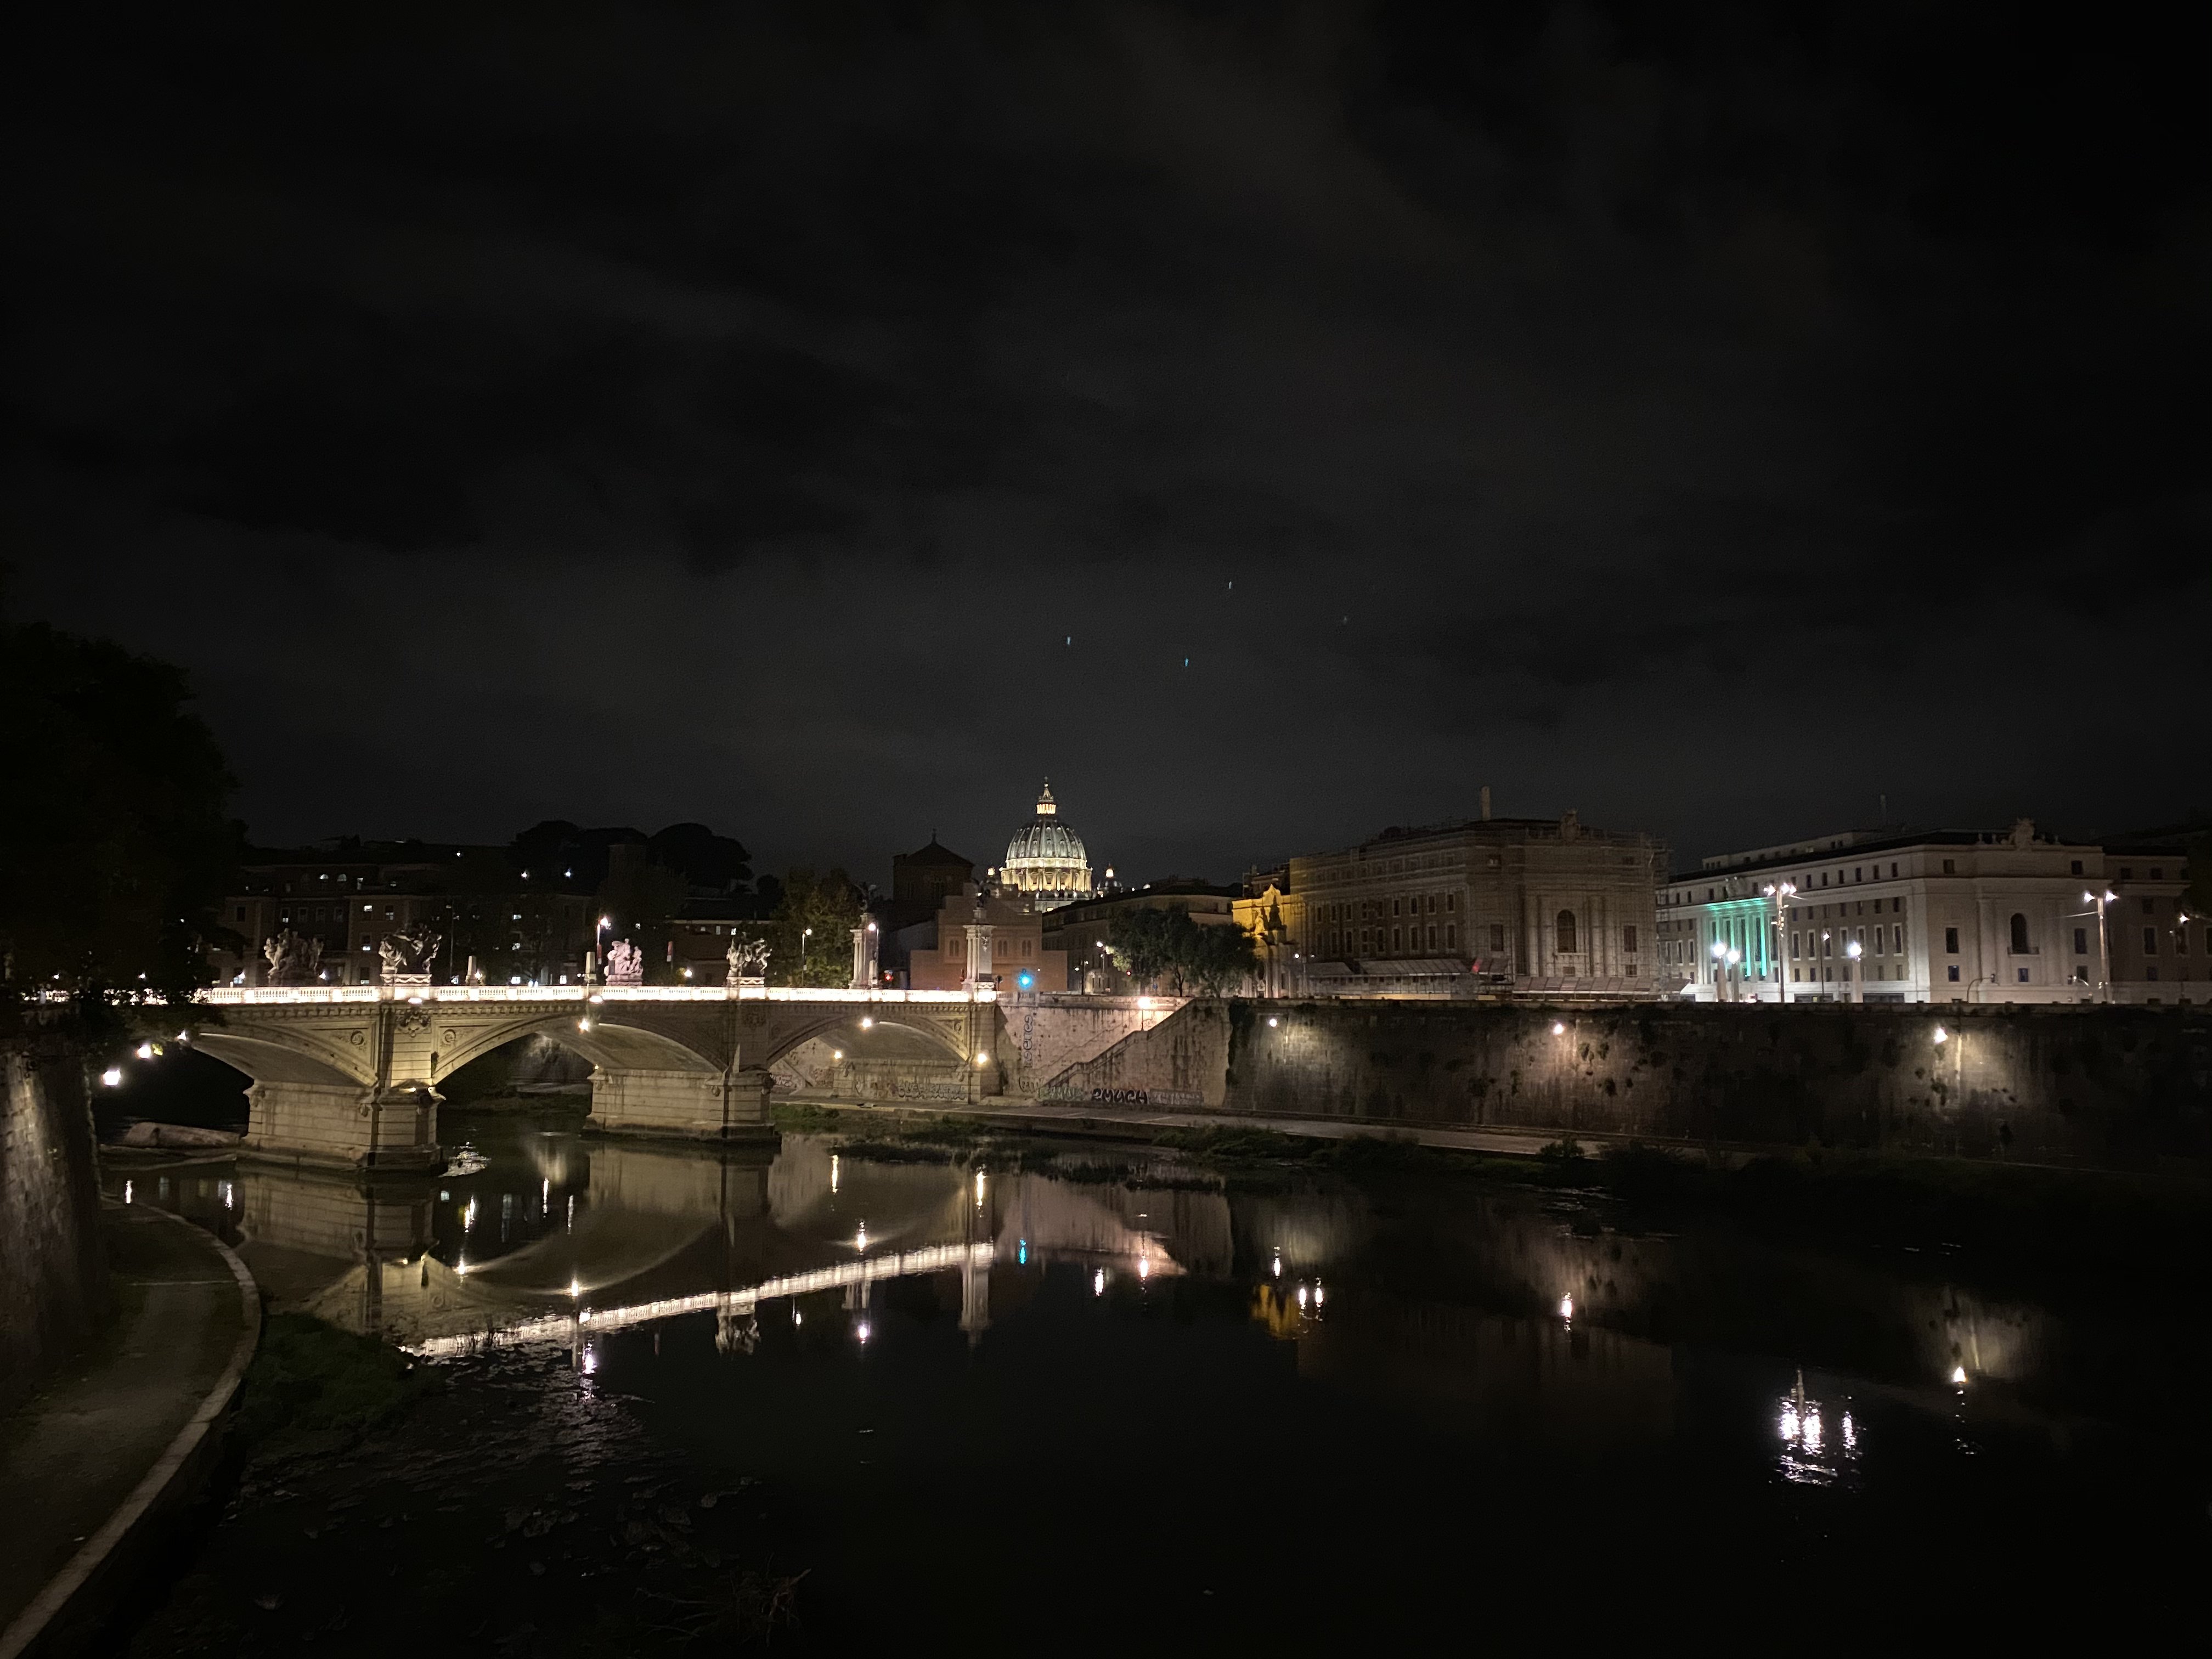 Ponte Vittorio Emanuele II, wide camera, night mode off. That’s St. Peter’s Basilica in the background.